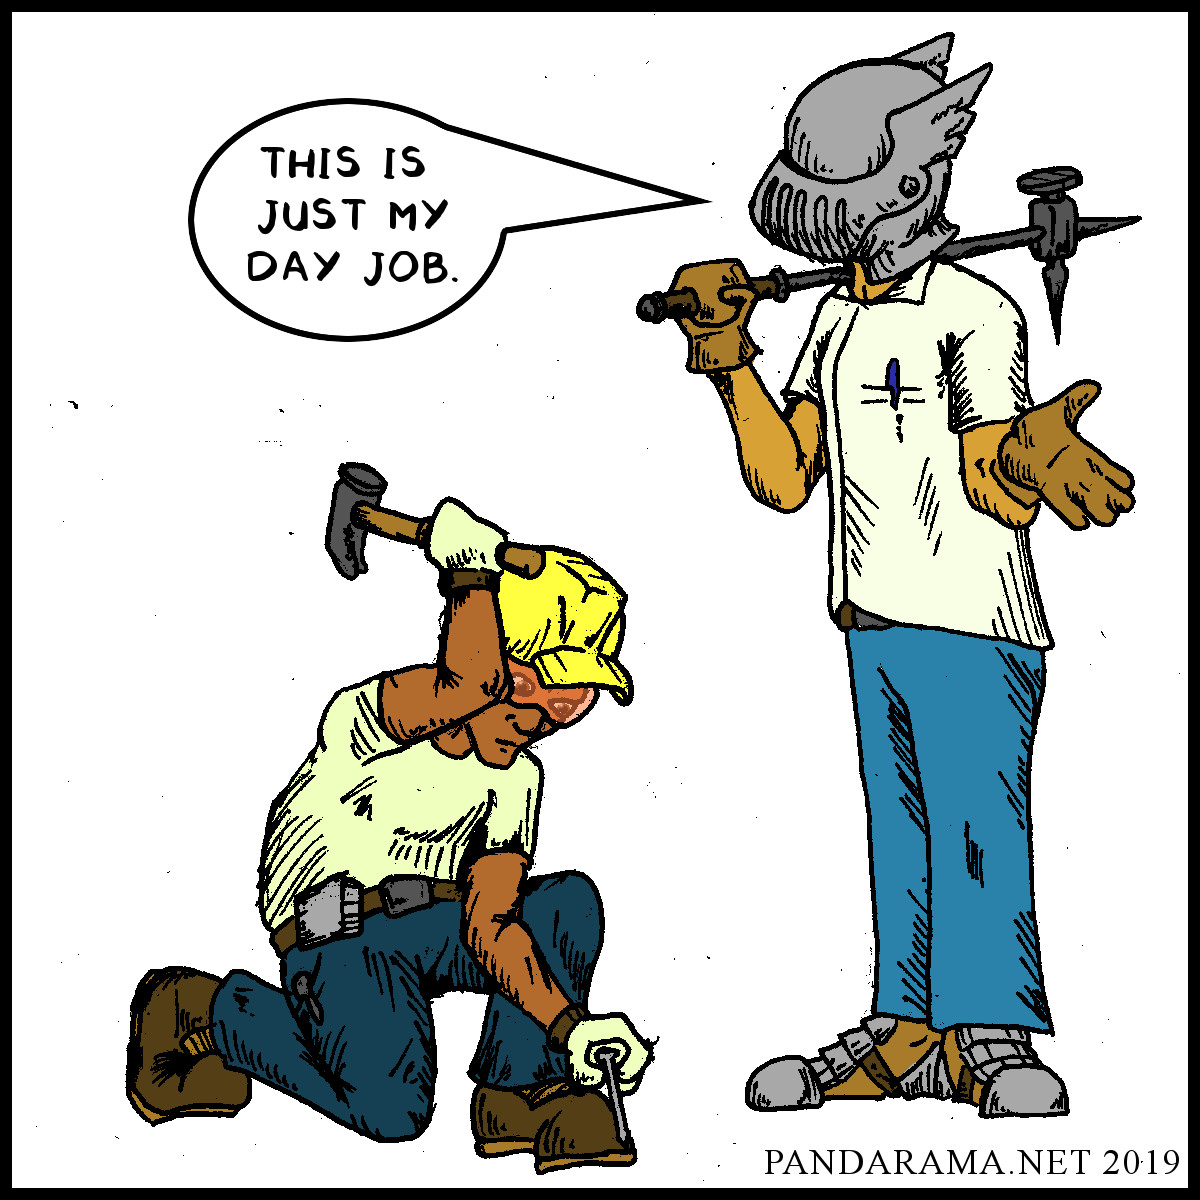 guy in a knight's helmet with warhammer explains to a to construction worker with hard hat and claw hammer that this is just his day job. comic strip, comic strips, comicstrip, comicstrips, cartoons, comic, comics, webcomic, webcomics.